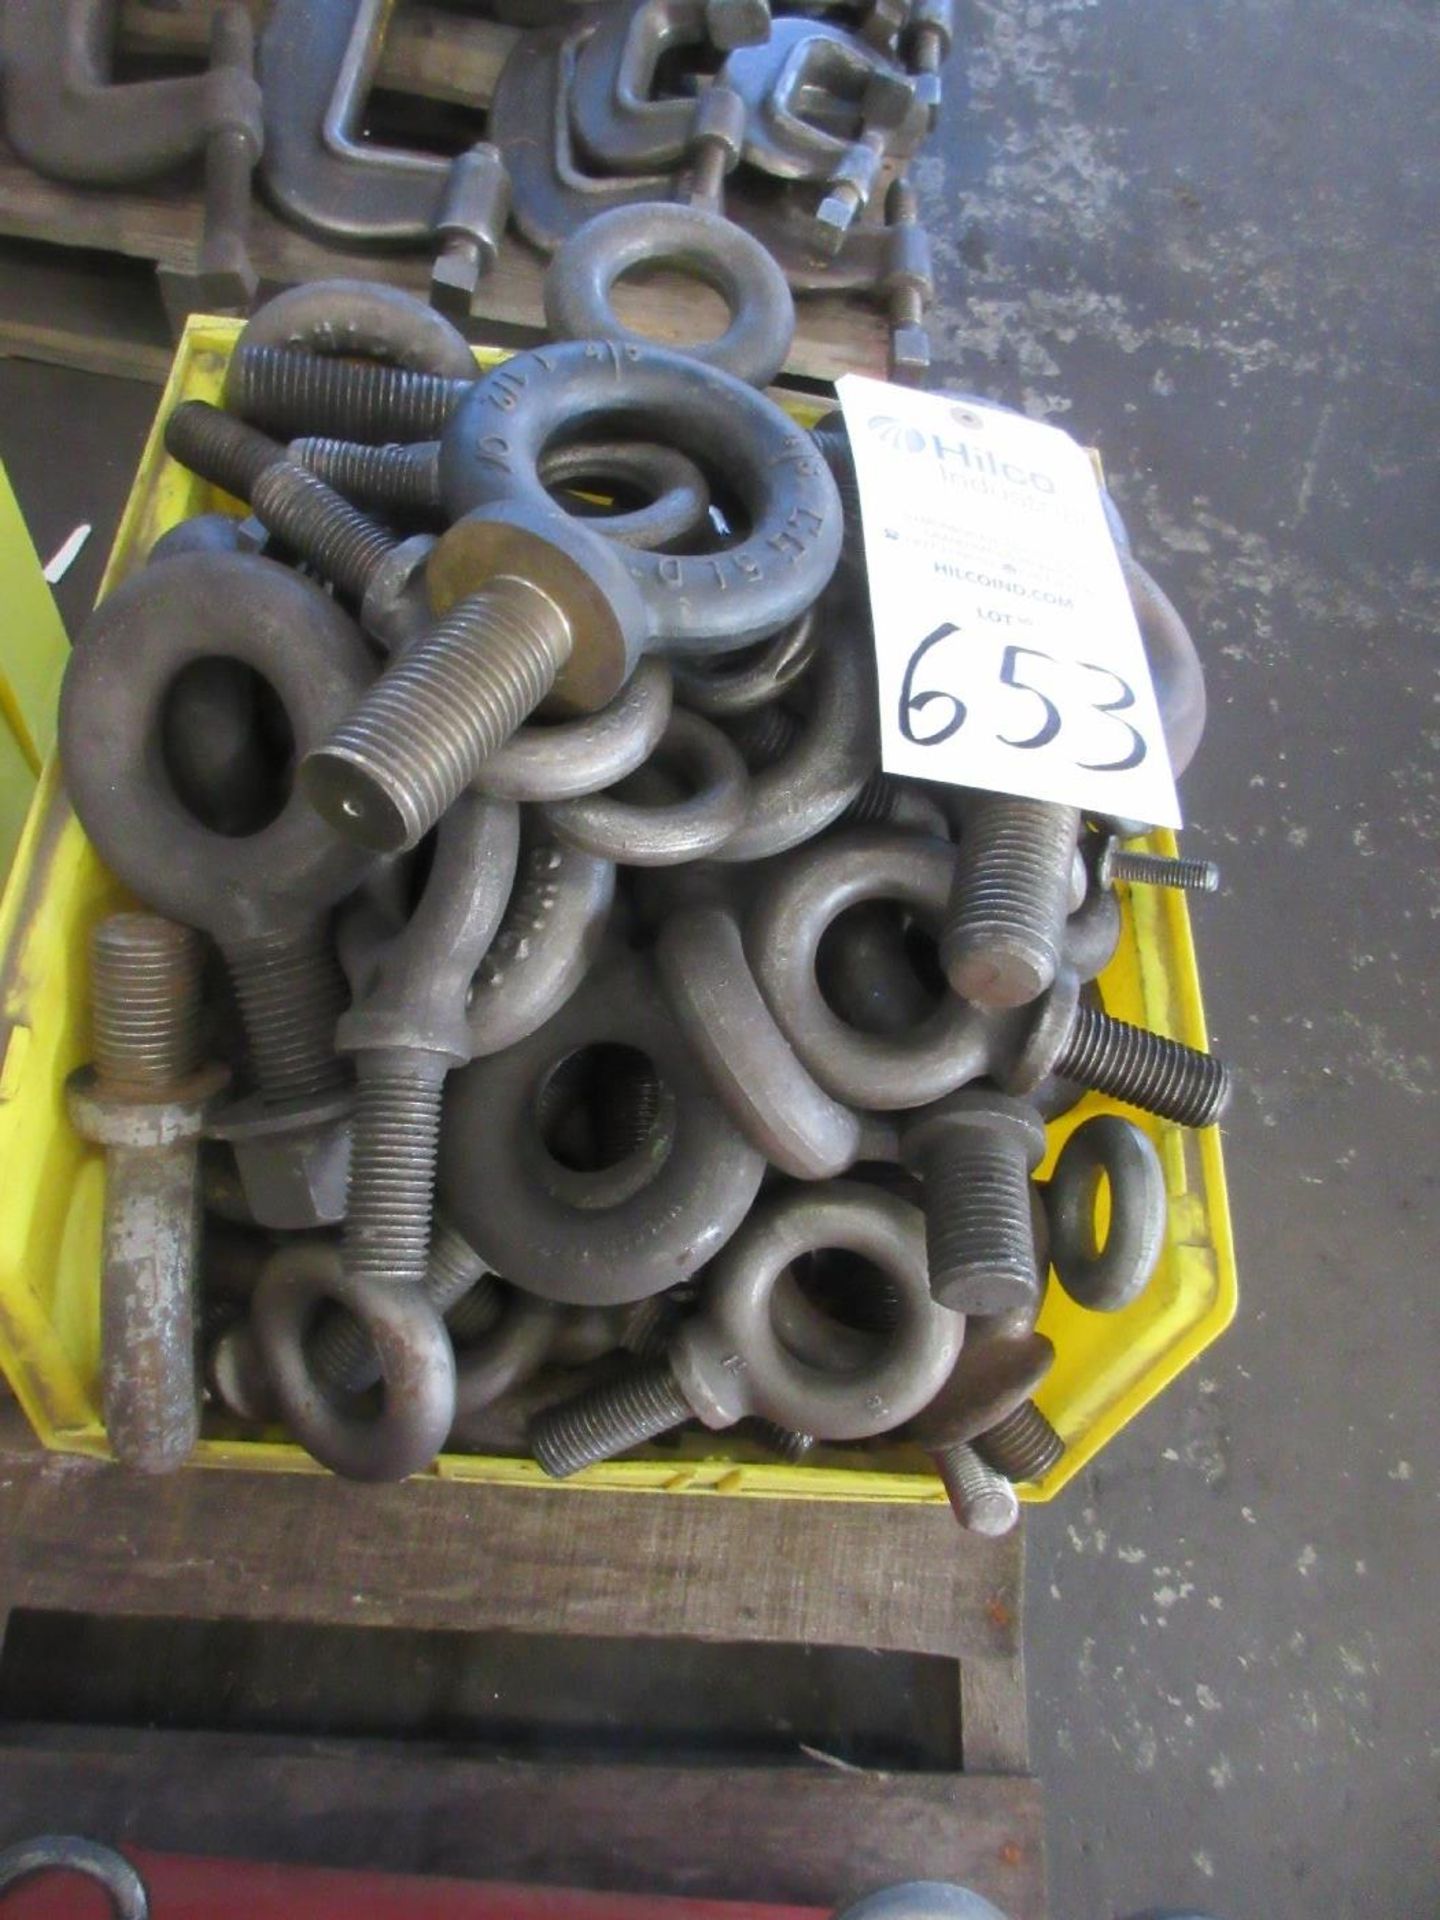 Assorted Large I-Bolt Miscellaneous